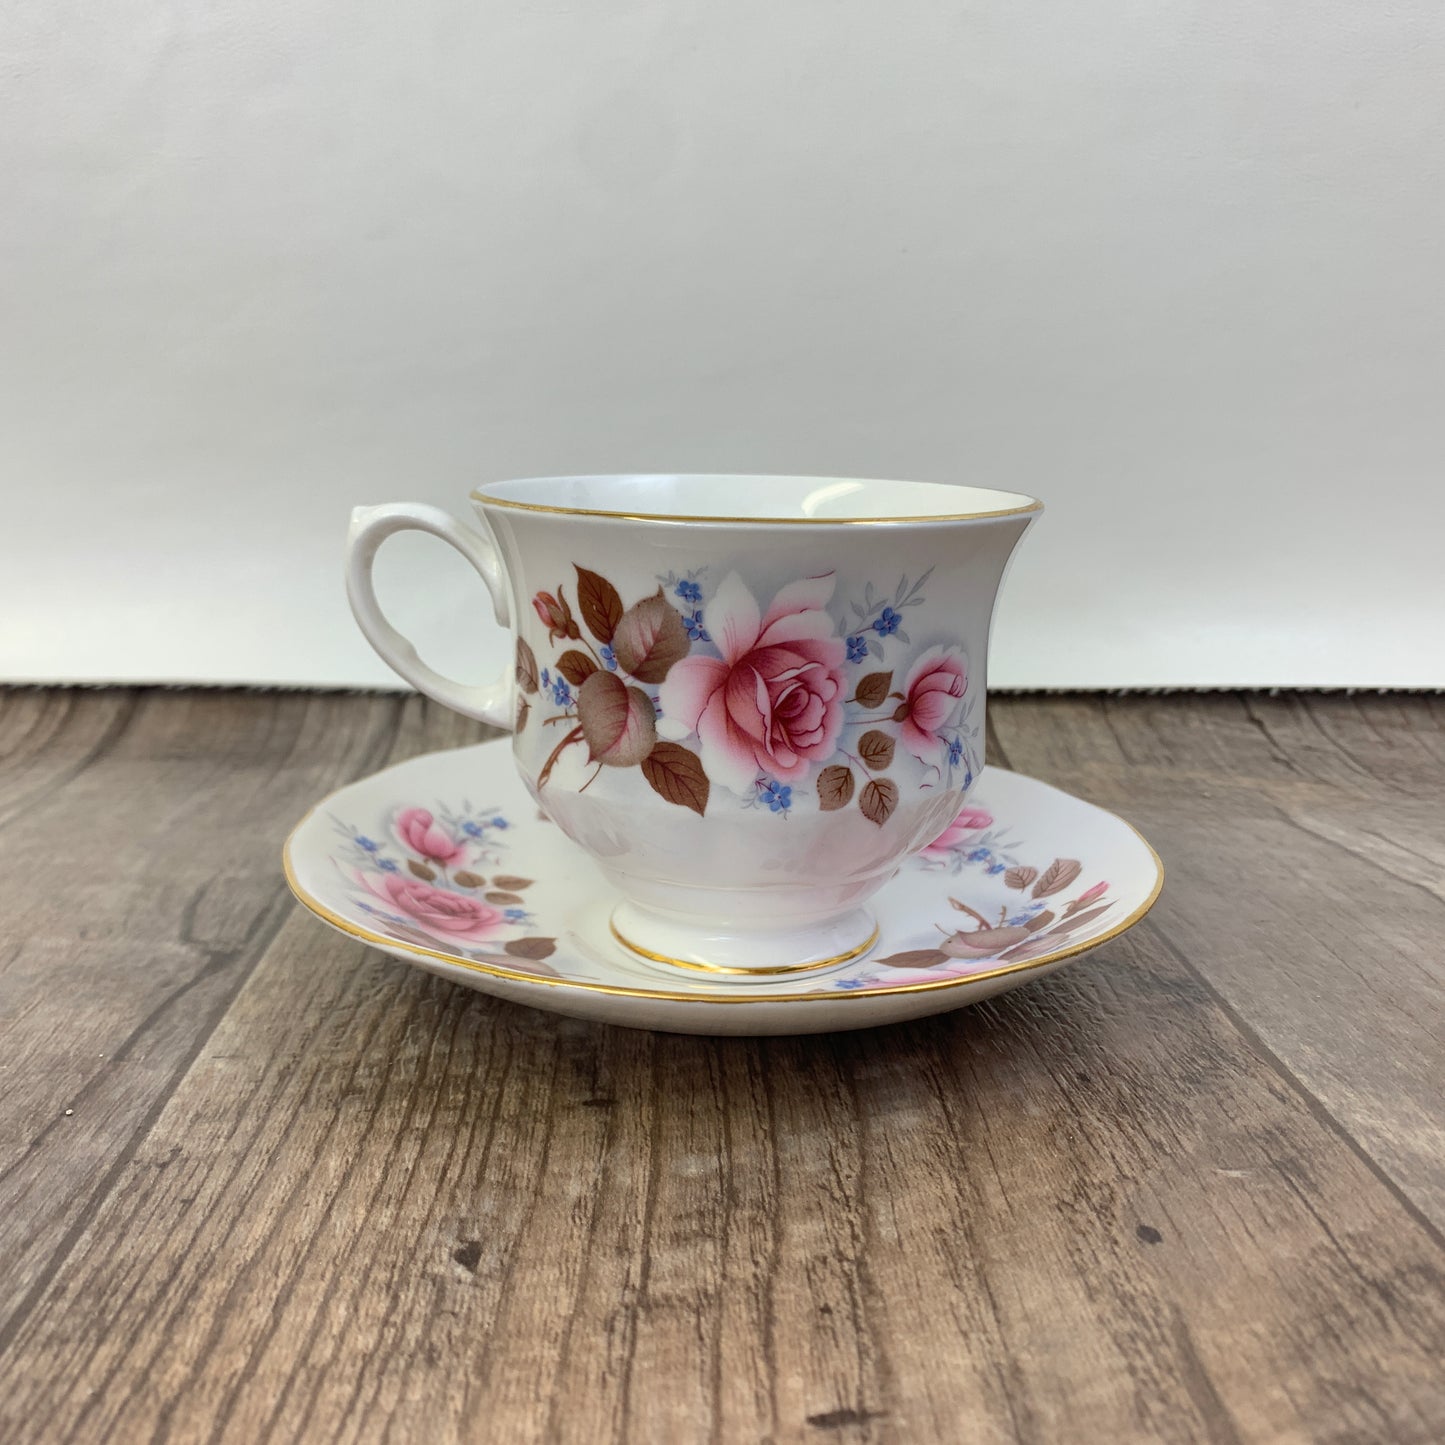 Pink and Blue Floral Teacup, Queen Anne Vintage Tea Cup and Saucer Set